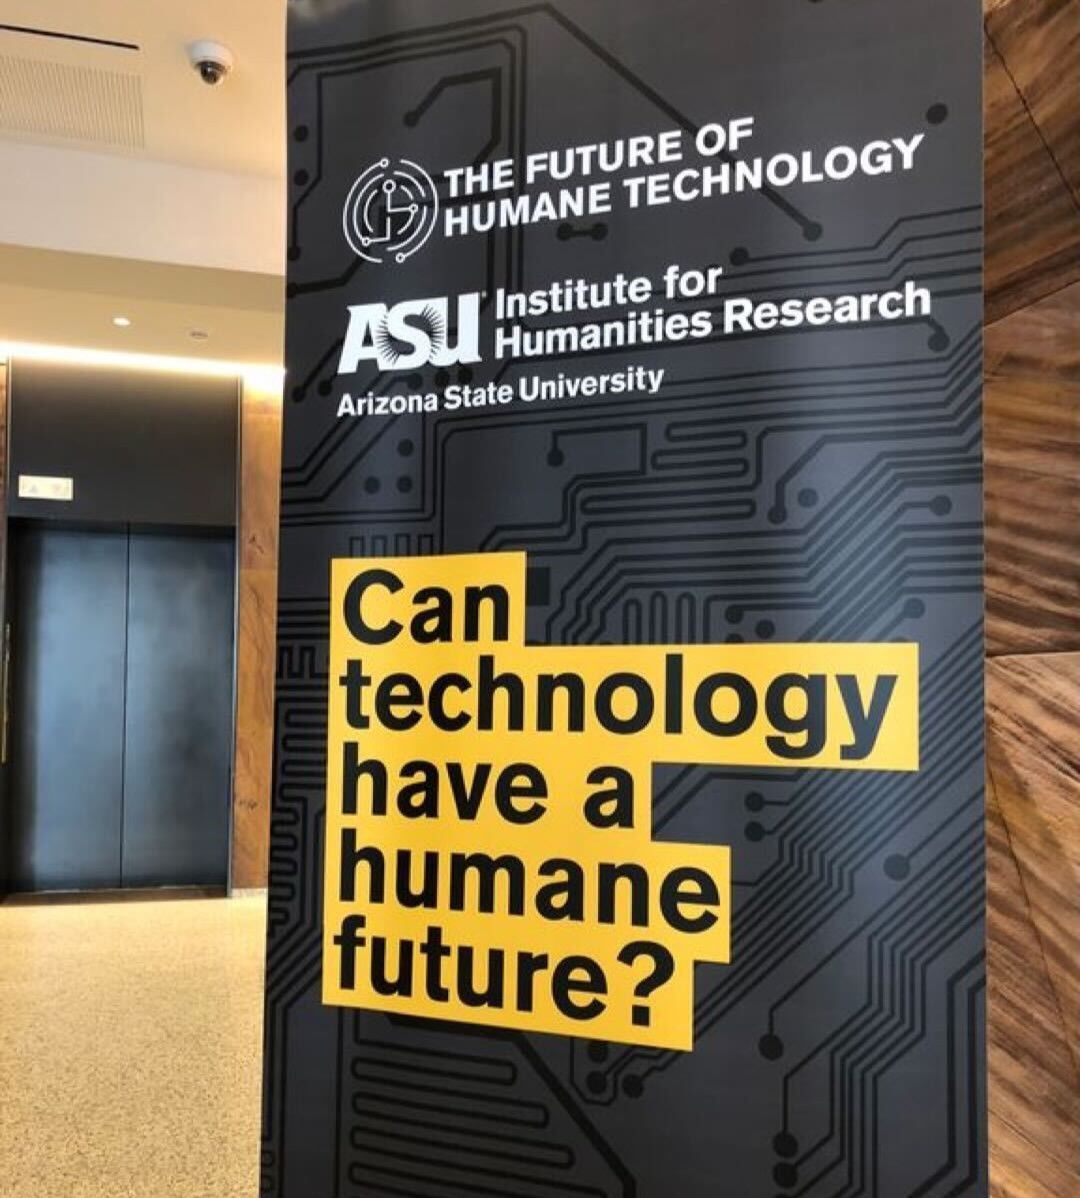 On this day 5 years ago, our friends @HumIt_ASU hosted 'The Future of Humane Technology' in D.C.—an event that led to the renewed mission of our Center. Much has happened in the last 5 years, but the vision inspired by this event remains the same! #humanetech